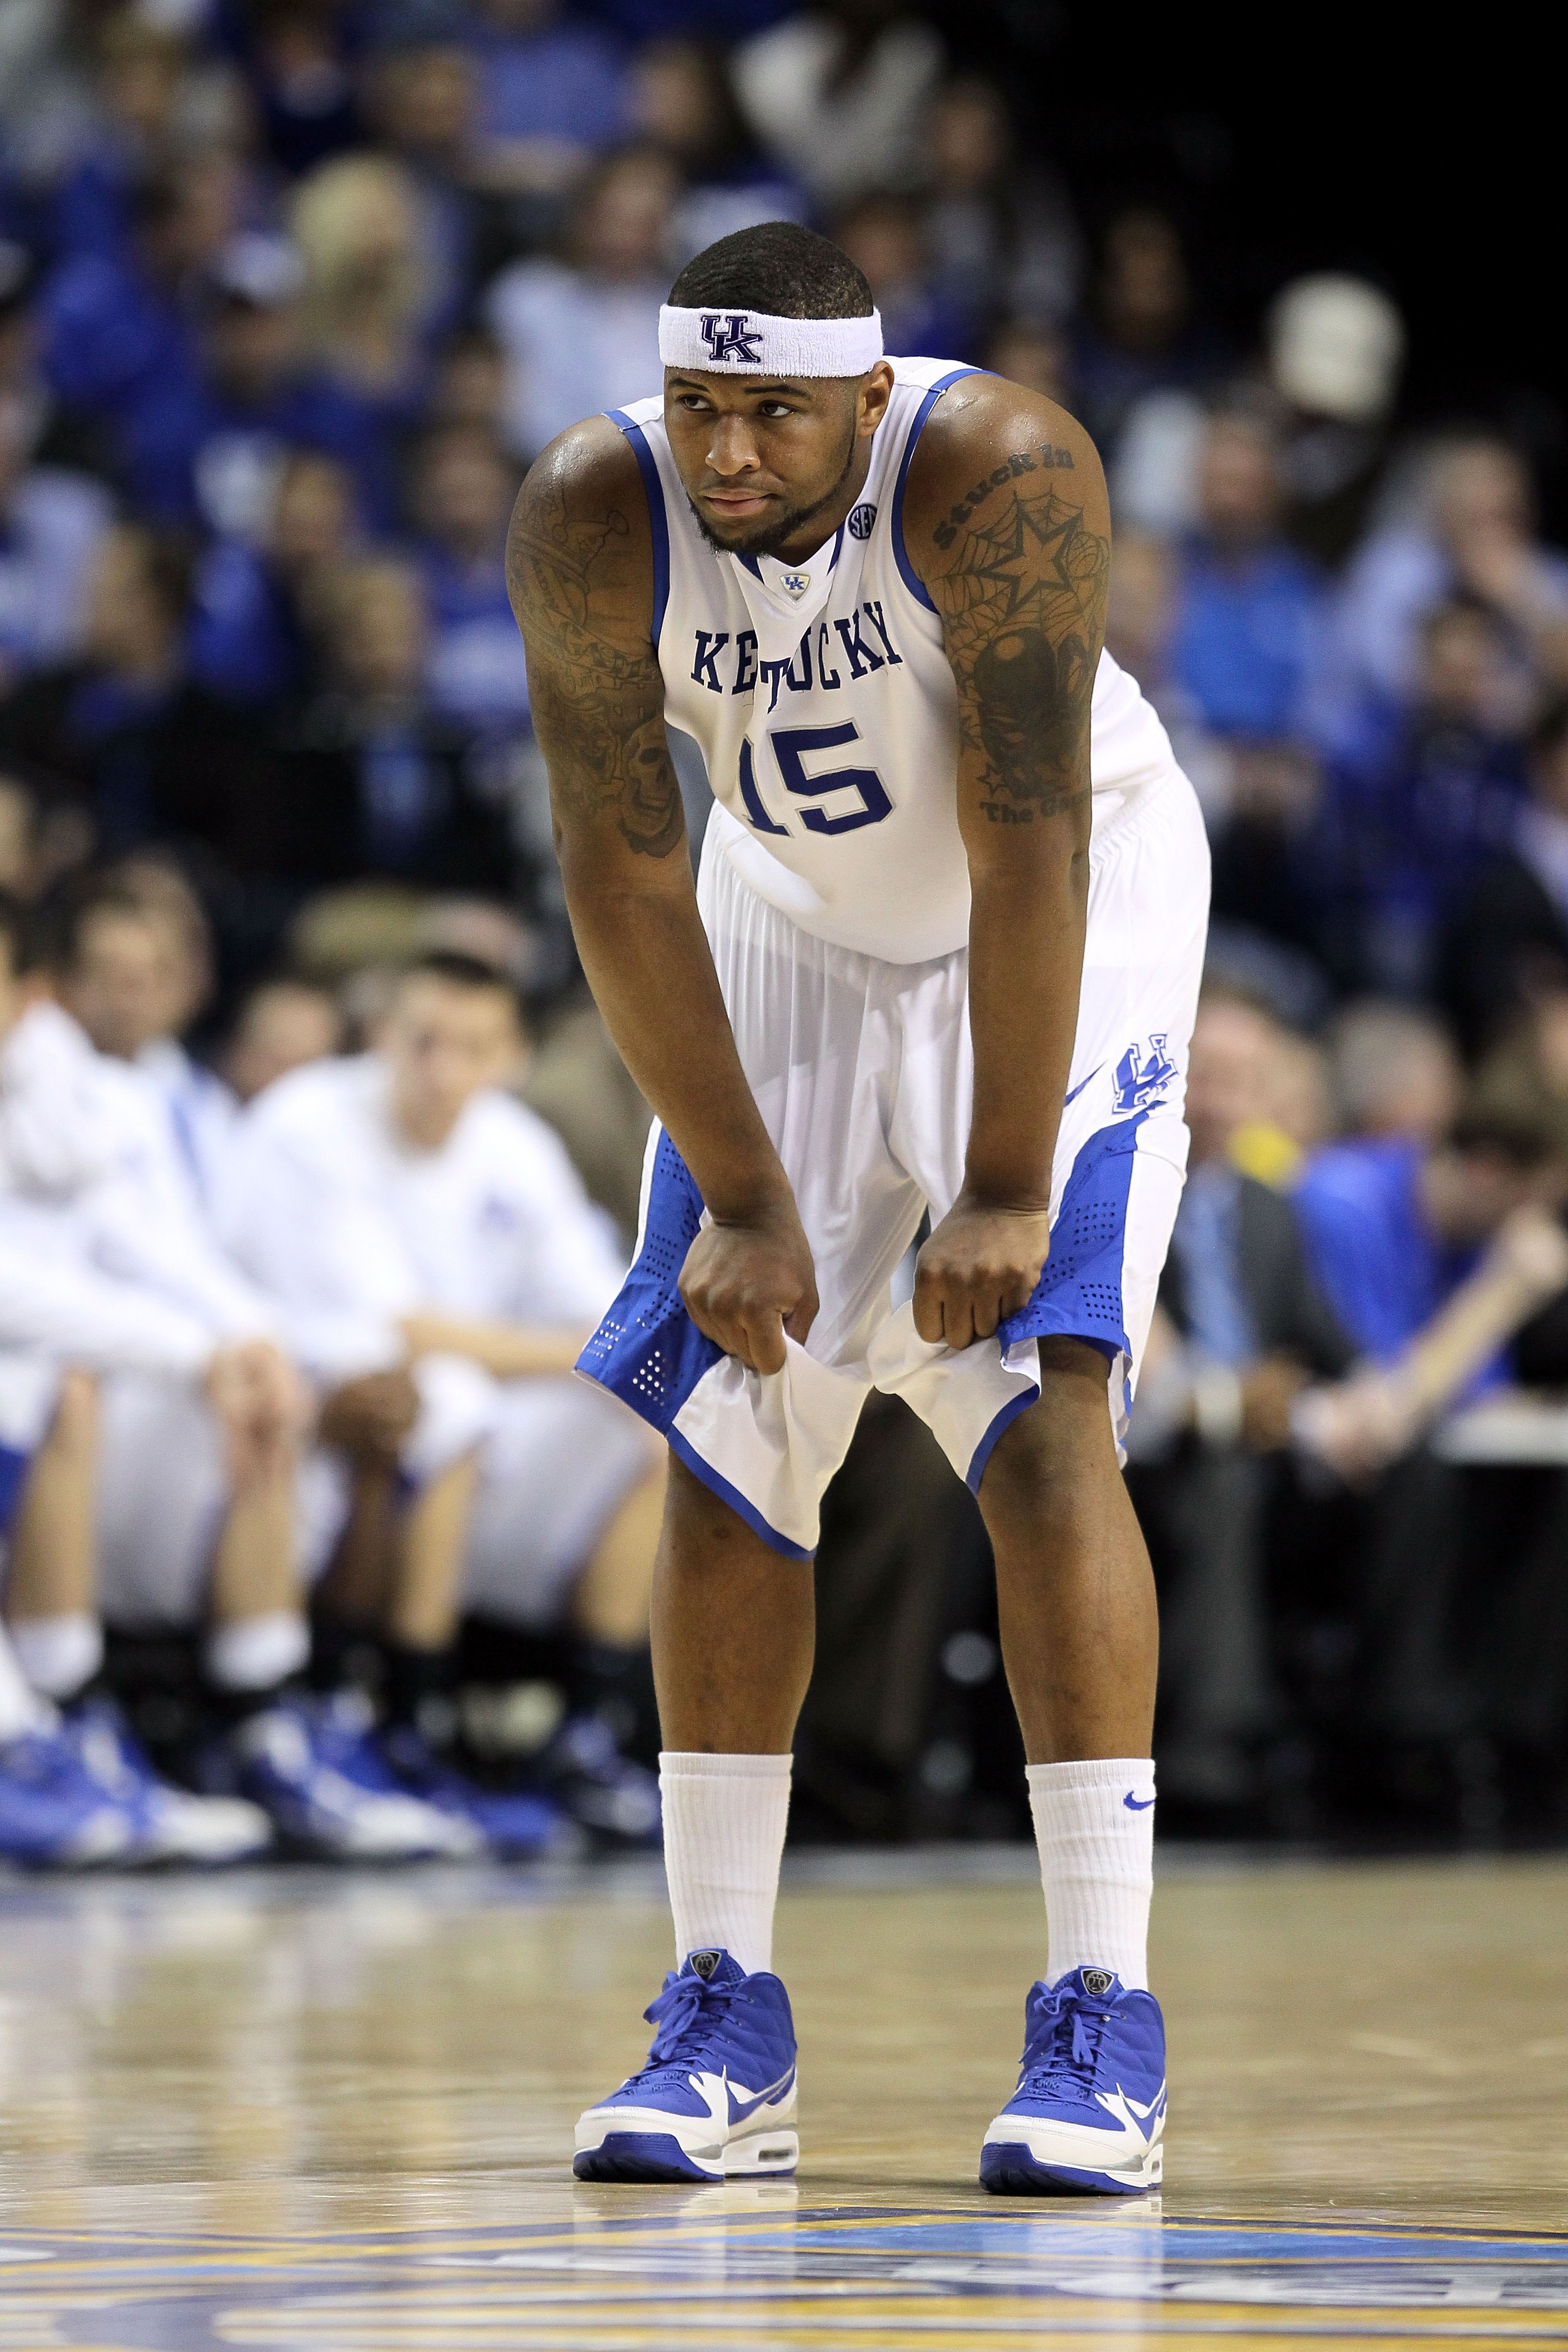 NASHVILLE, TN - MARCH 13:  DeMarcus Cousins #15 of the Kentucky Wildcats looks on against the Tennessee Volunteers during the semirfinals of the SEC Men's Basketball Tournament at the Bridgestone Arena on March 13, 2010 in Nashville, Tennessee. Kentucky w